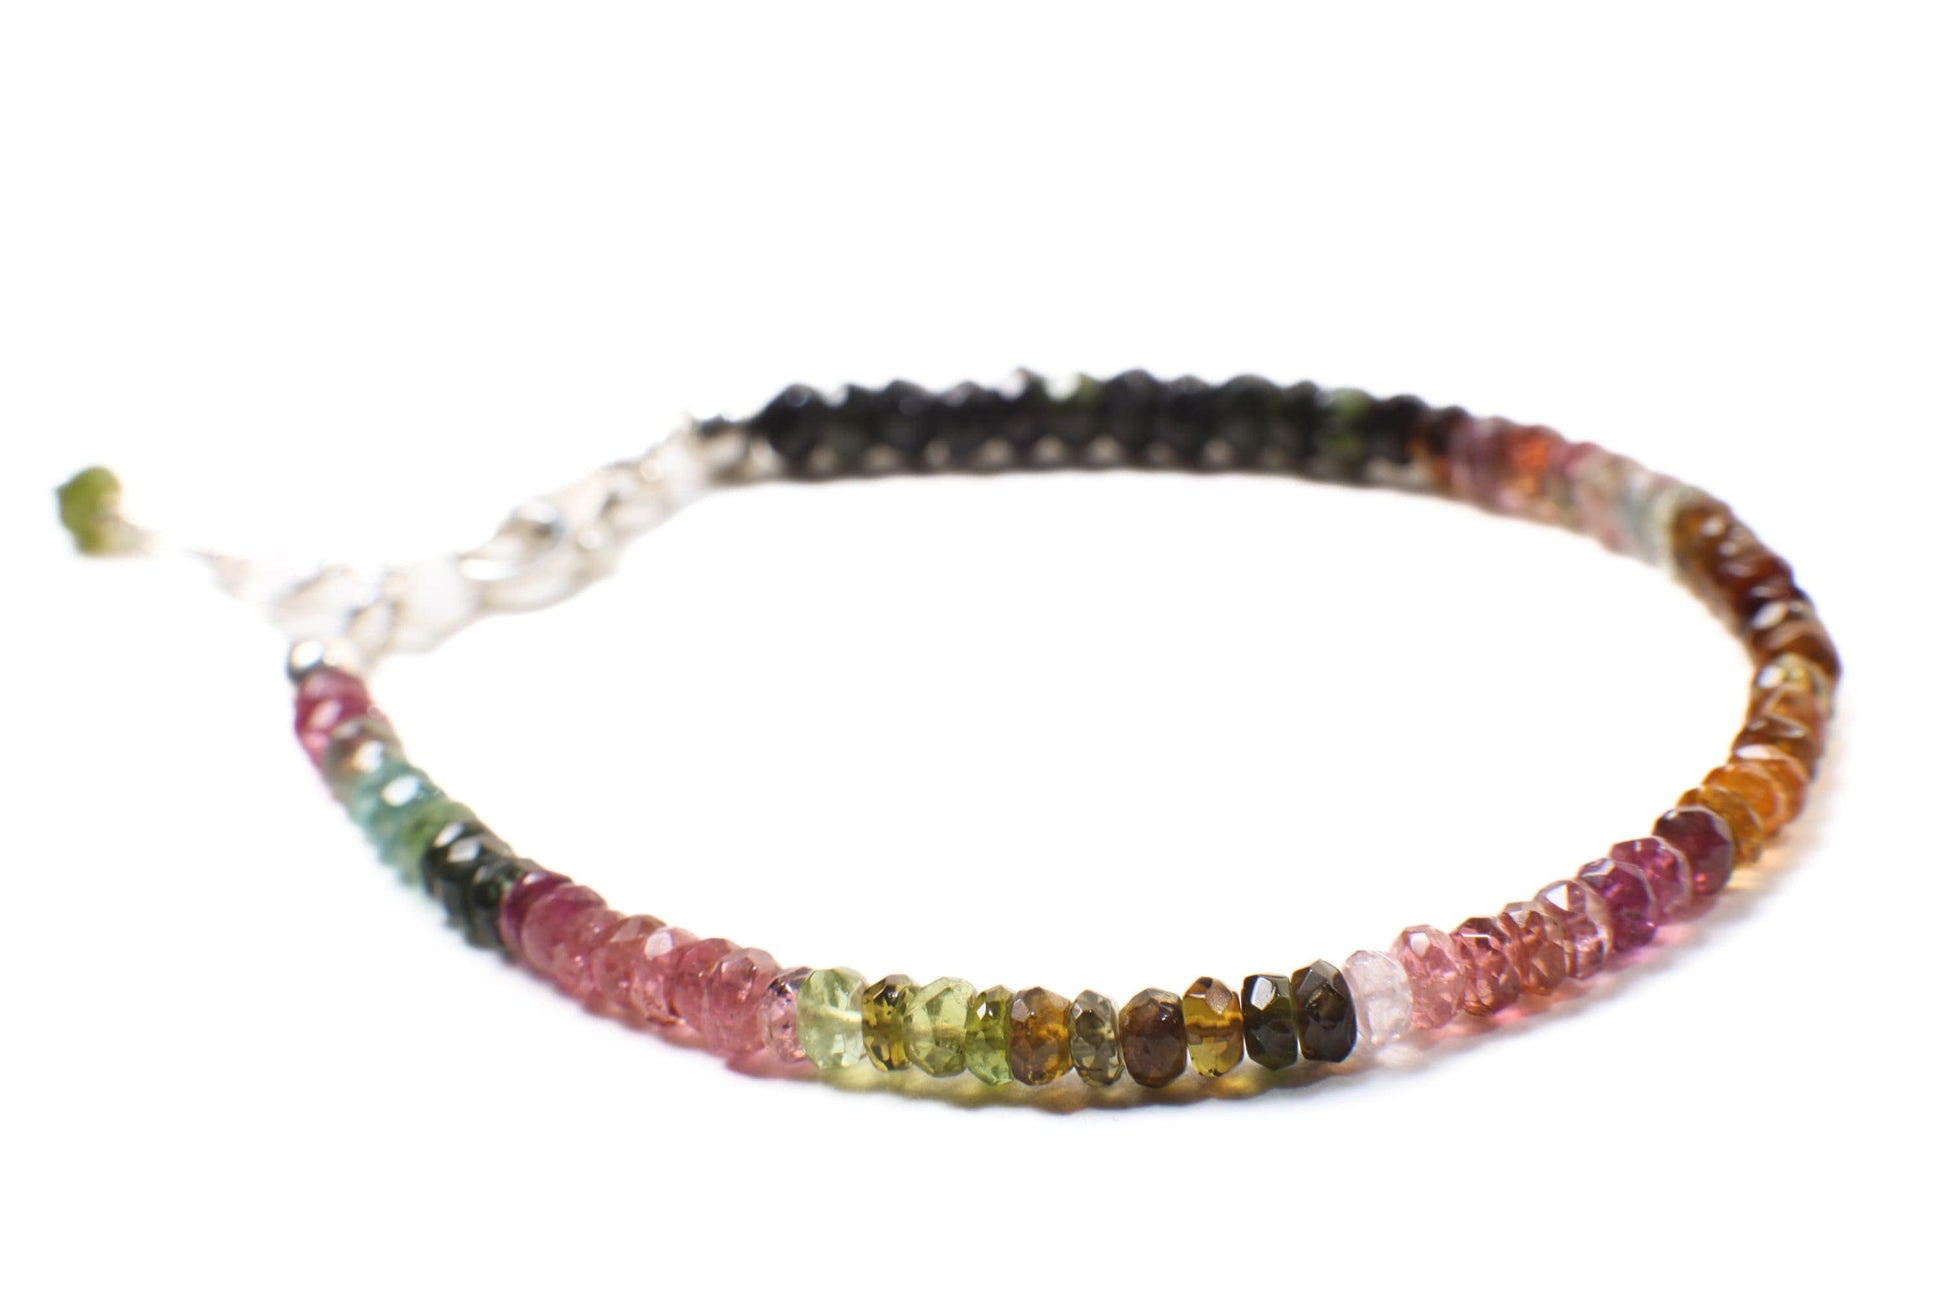 Watermelon Tourmaline 4mm Faceted Rondelle AAA quality in 925 Sterling Silver or 14k gold filled Bracelet with 1” extender .